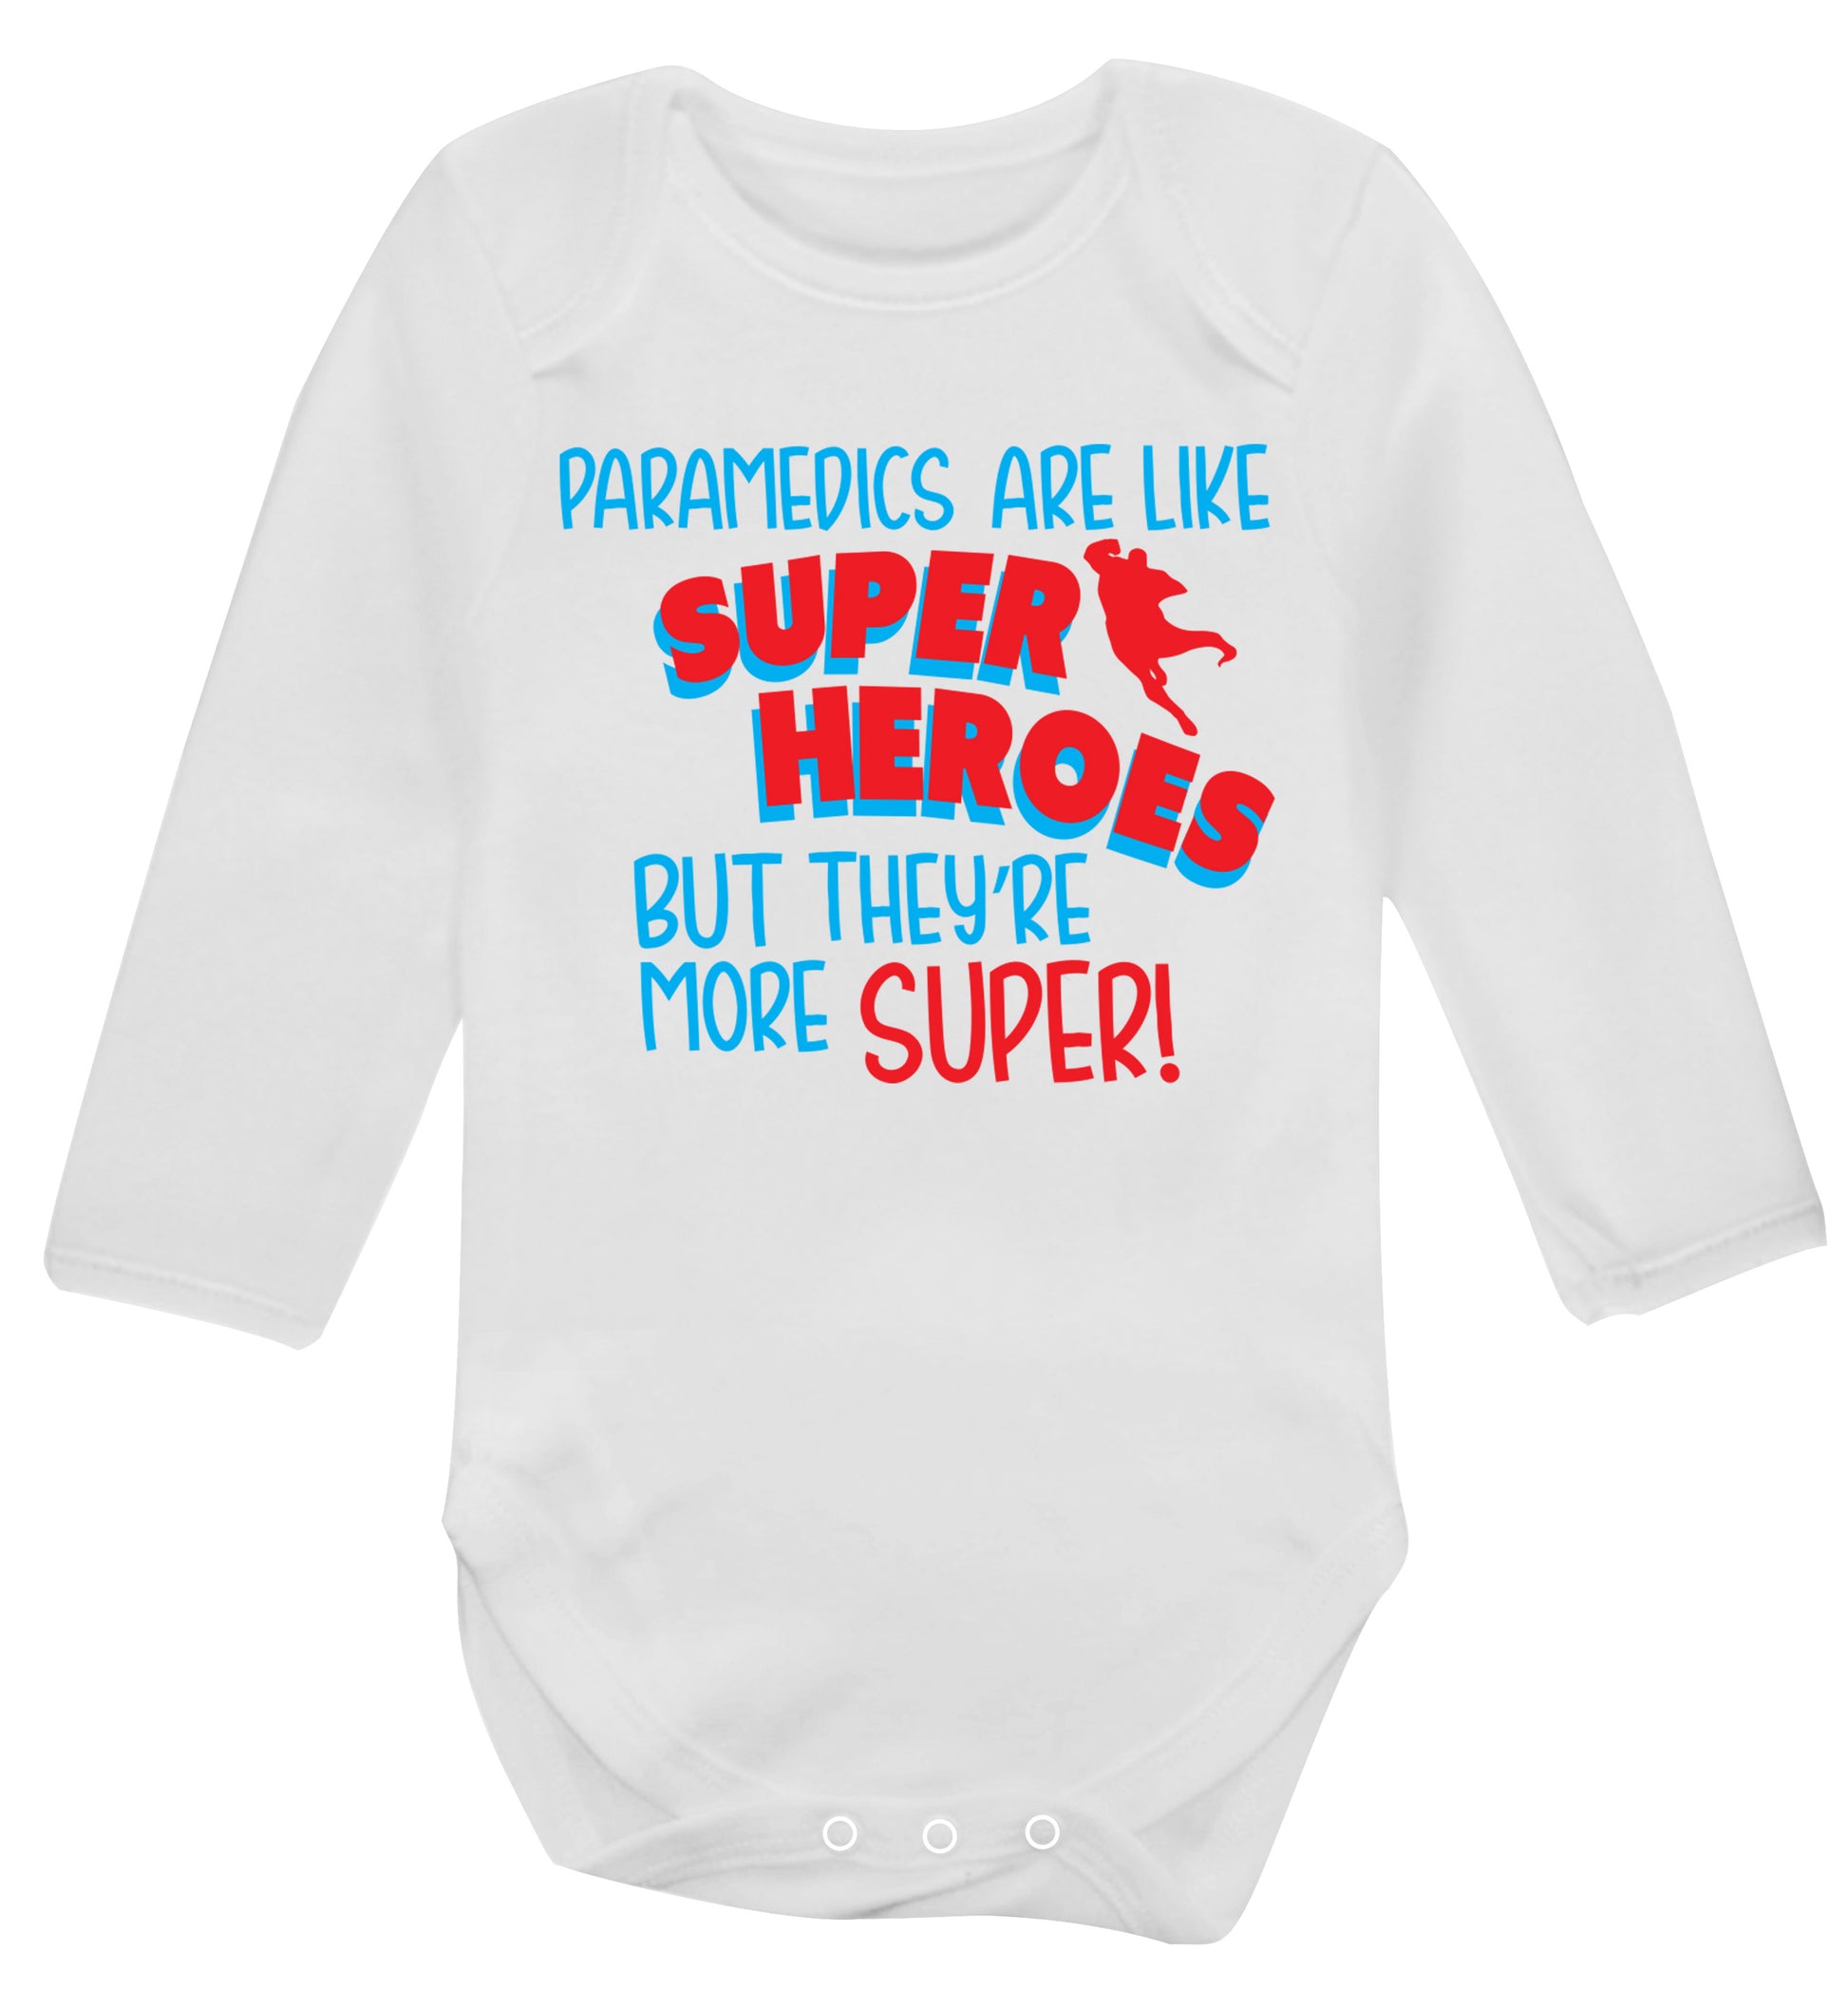 Paramedics are like superheros but they're more super Baby Vest long sleeved white 6-12 months